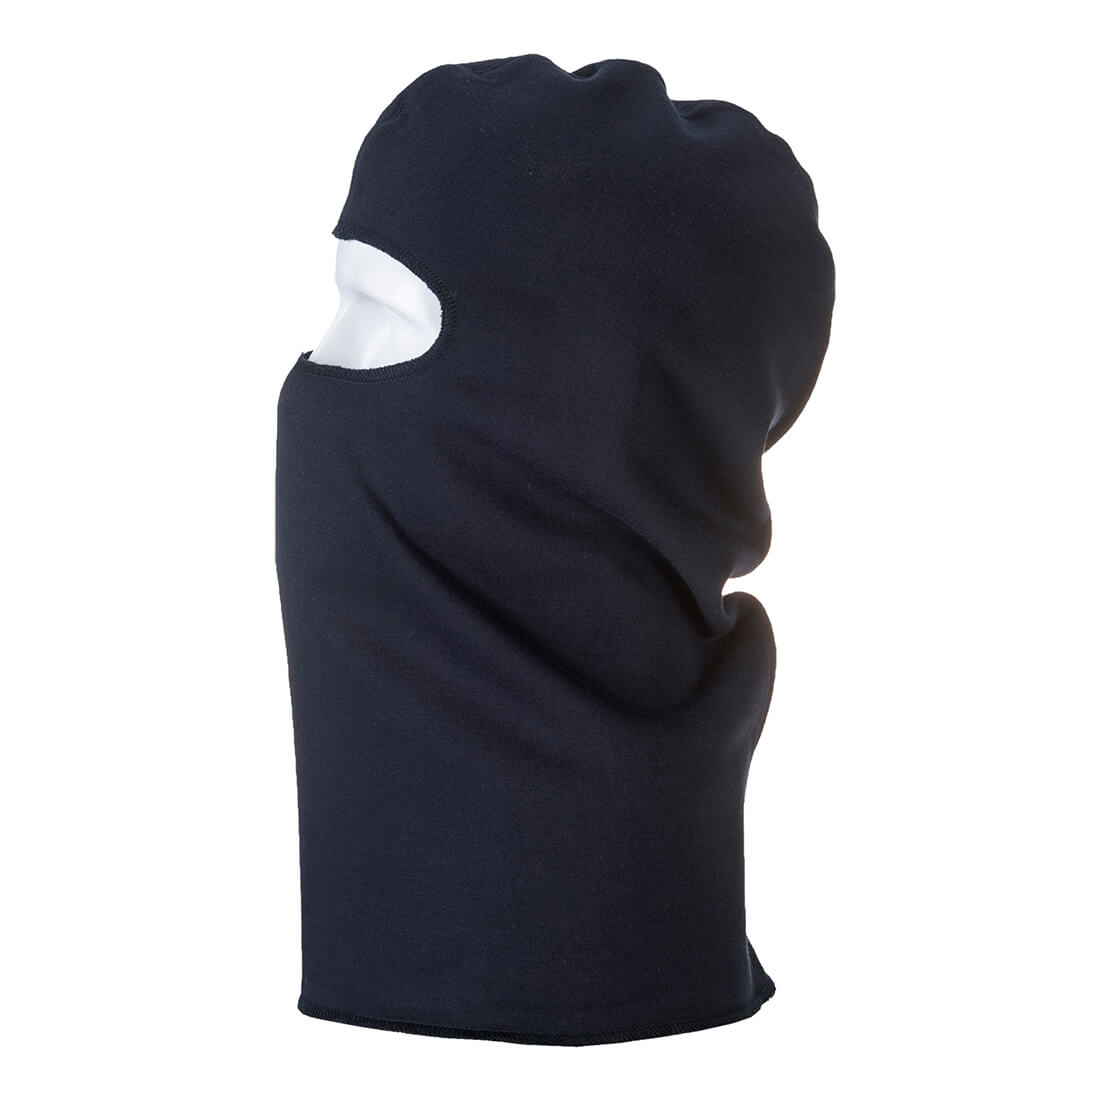 Modaflame Anti Static Flame Resistant Balaclava Navy One Size